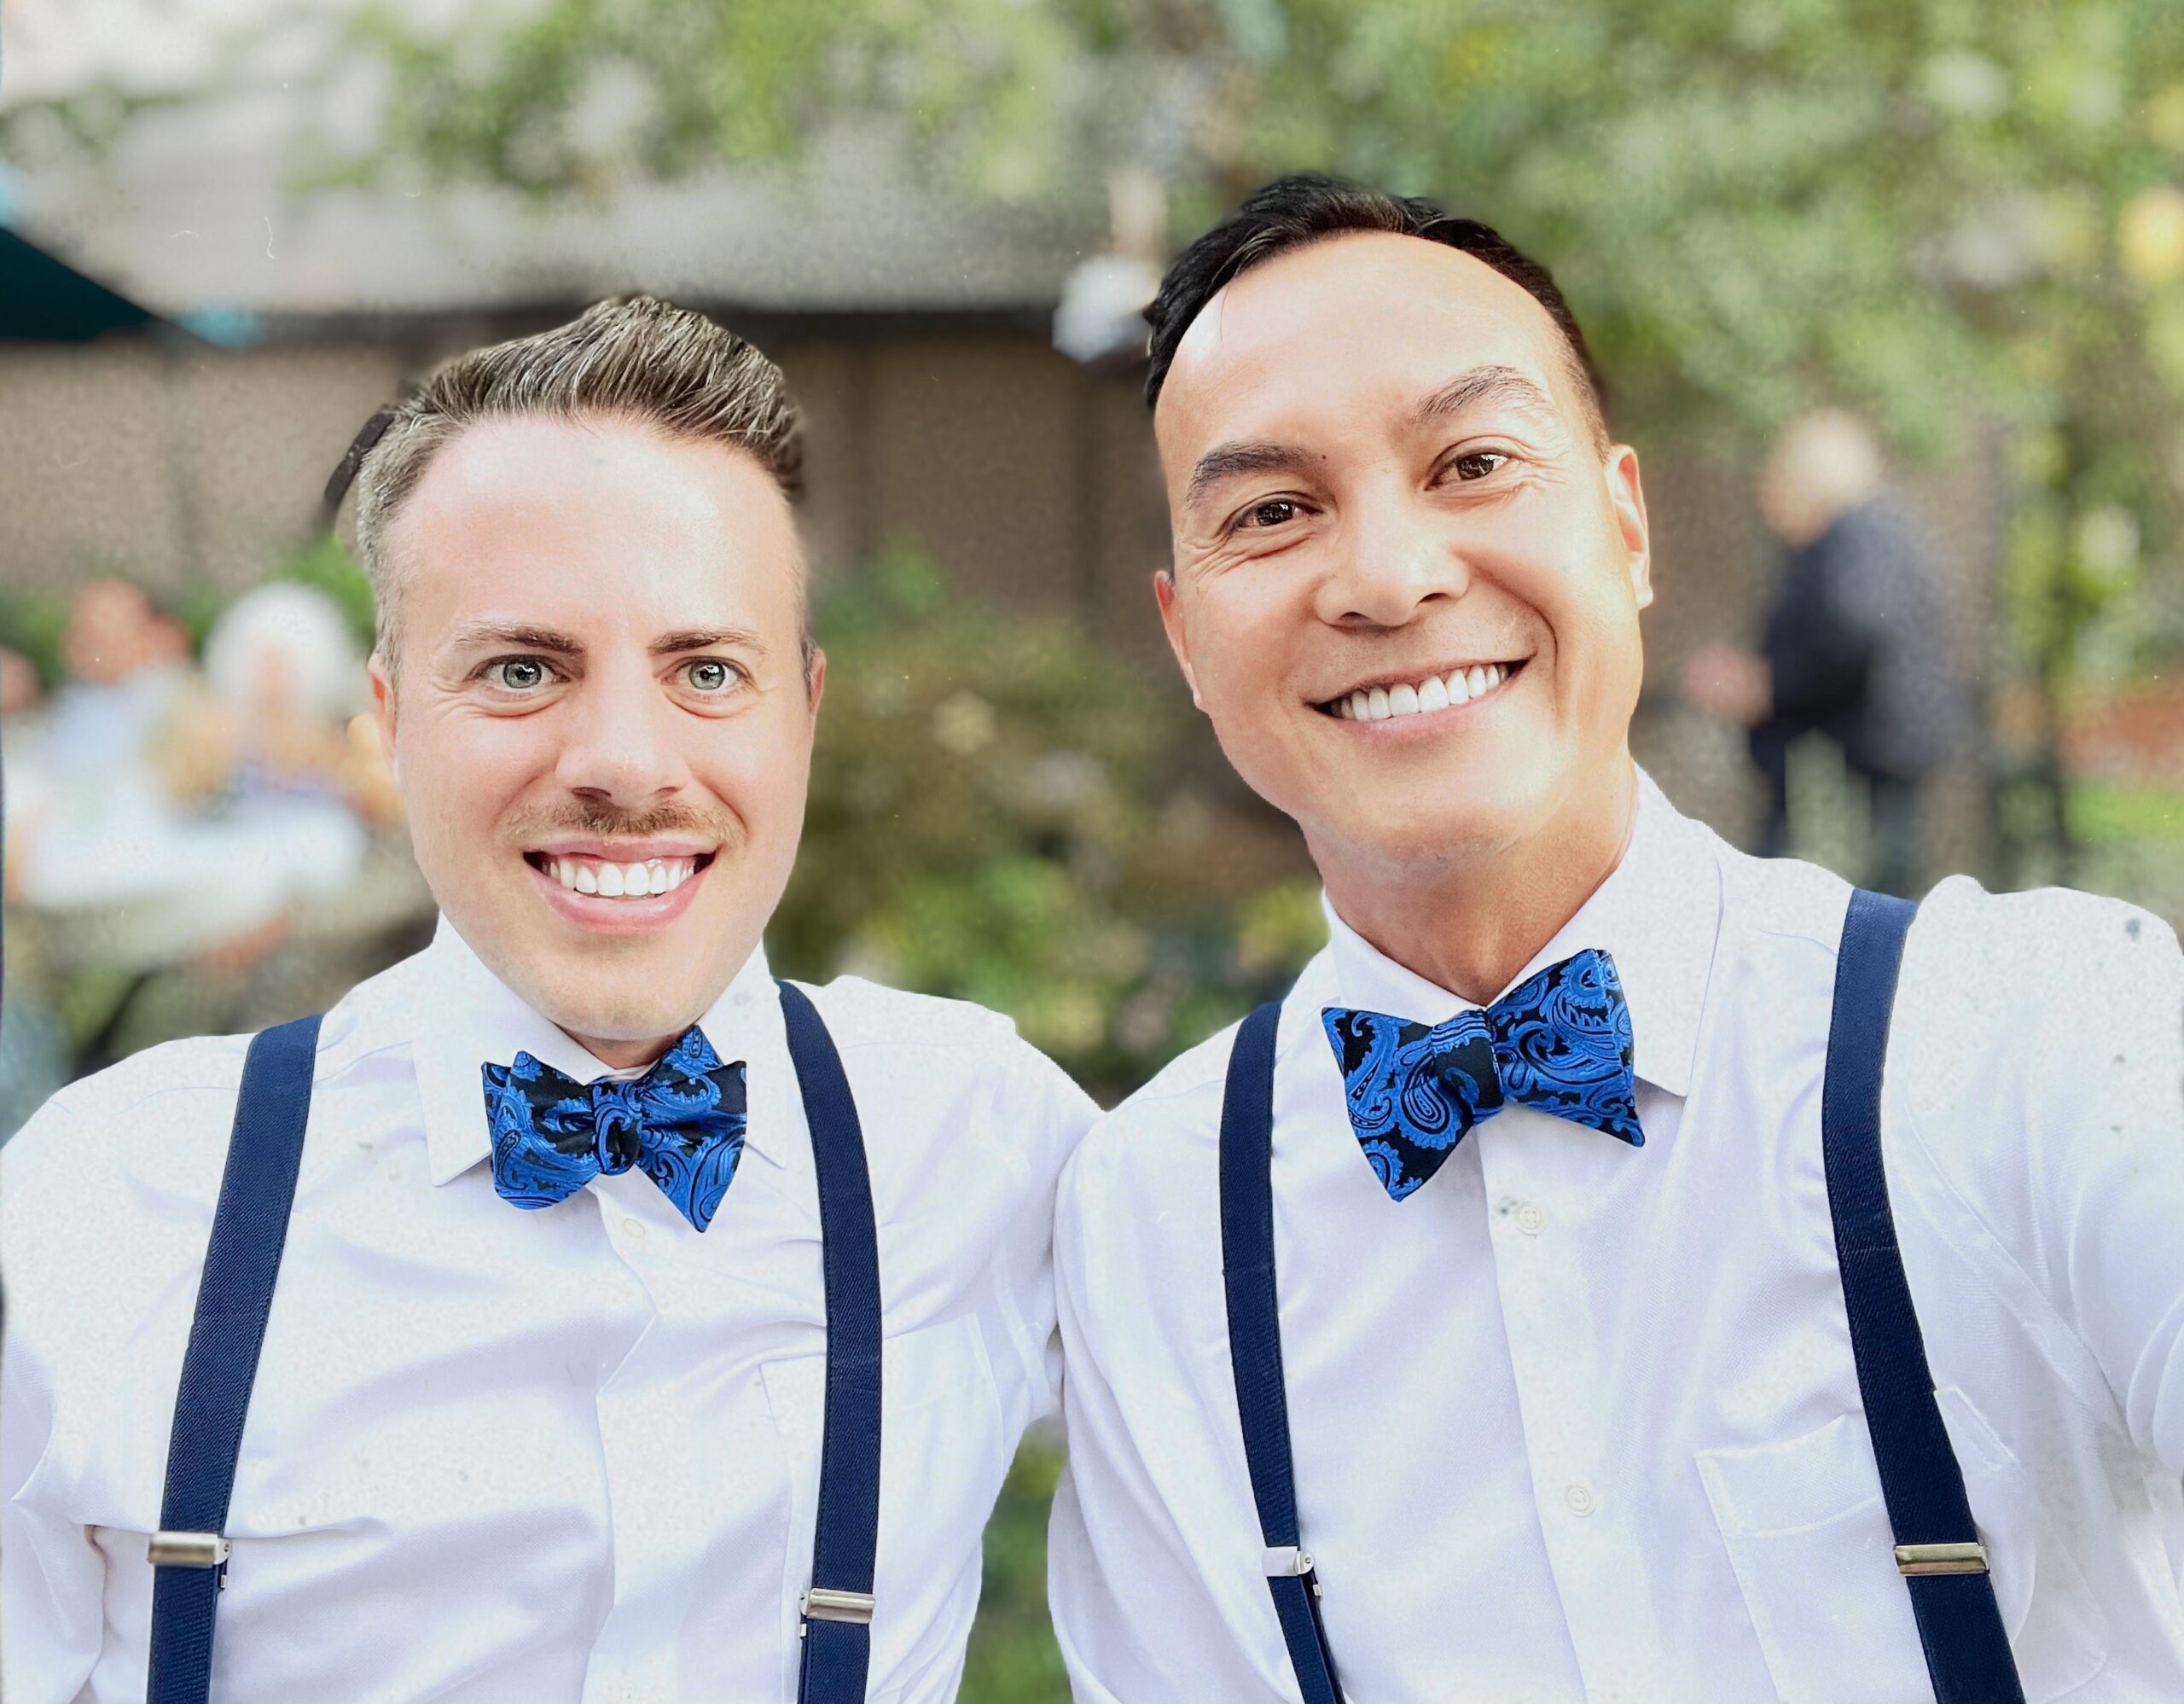 The couple smiling at a garden party. They both are wearing blue bow ties and suspenders.